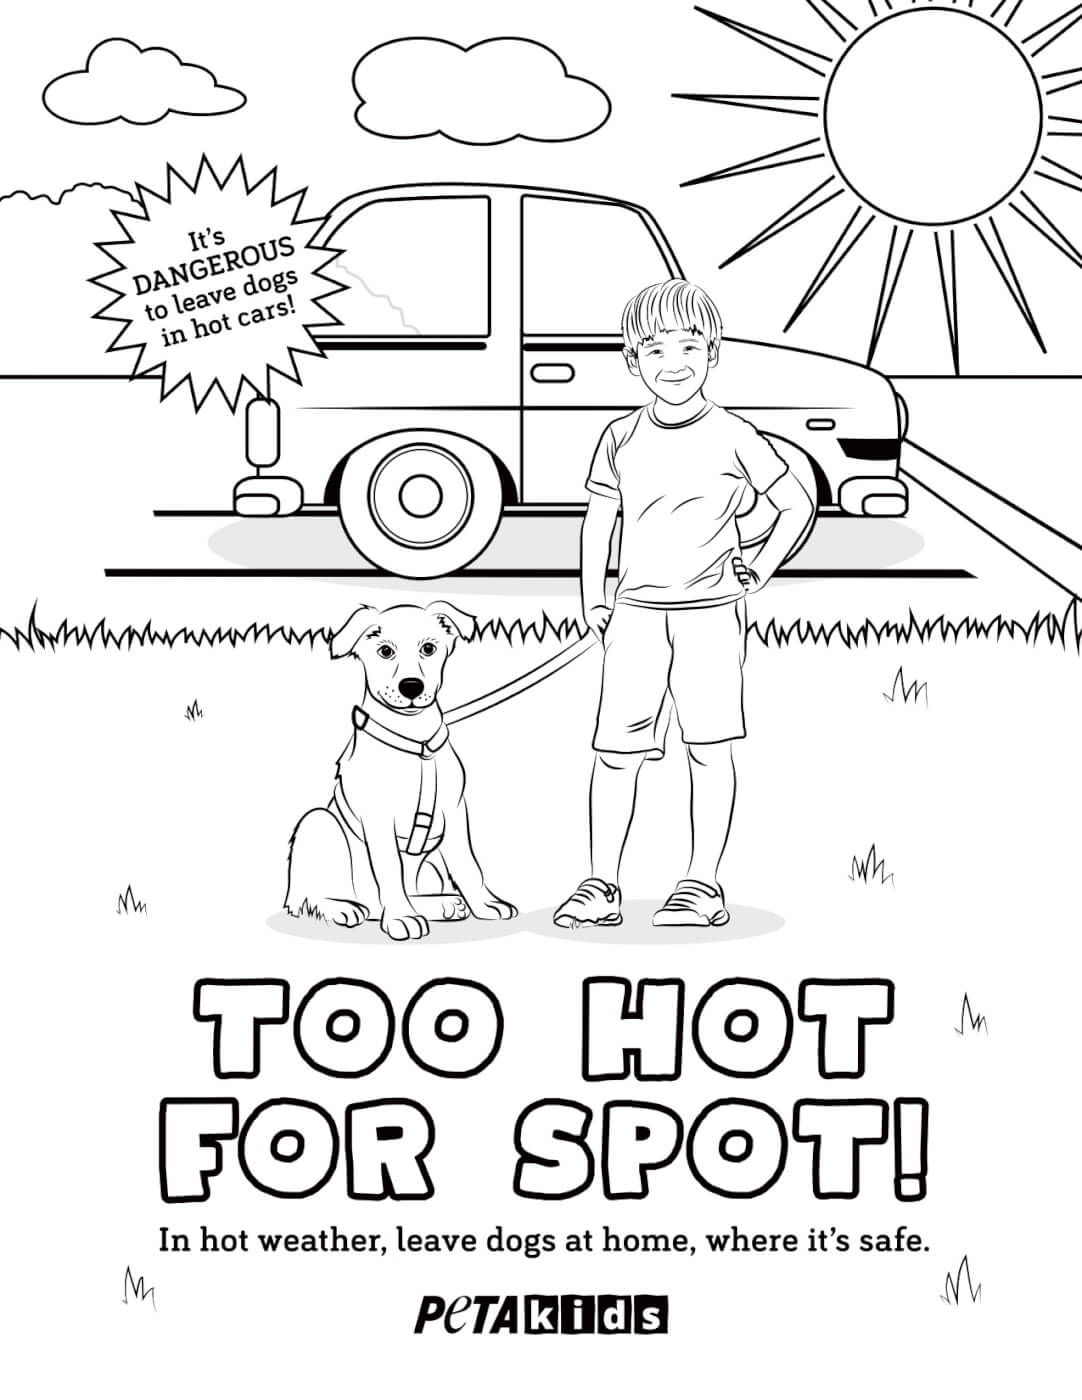 Help Protect Dogs From Hot Cars This Summer | PETA Kids